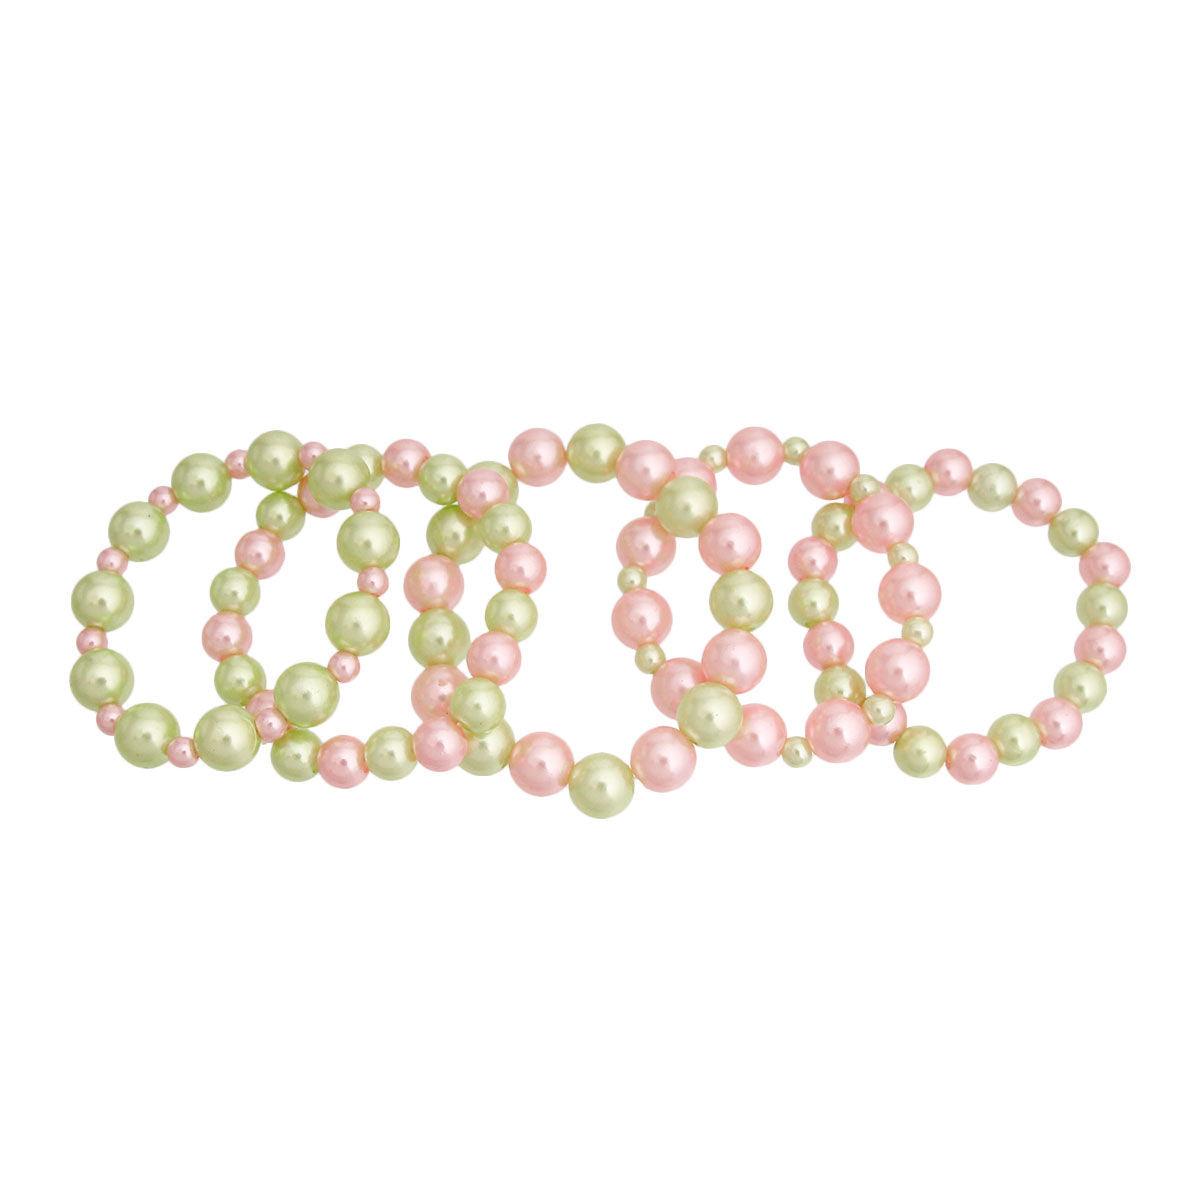 Pink/Green Fashion Pearls Bracelet Set: Perfect Blend of Style & Sophistication